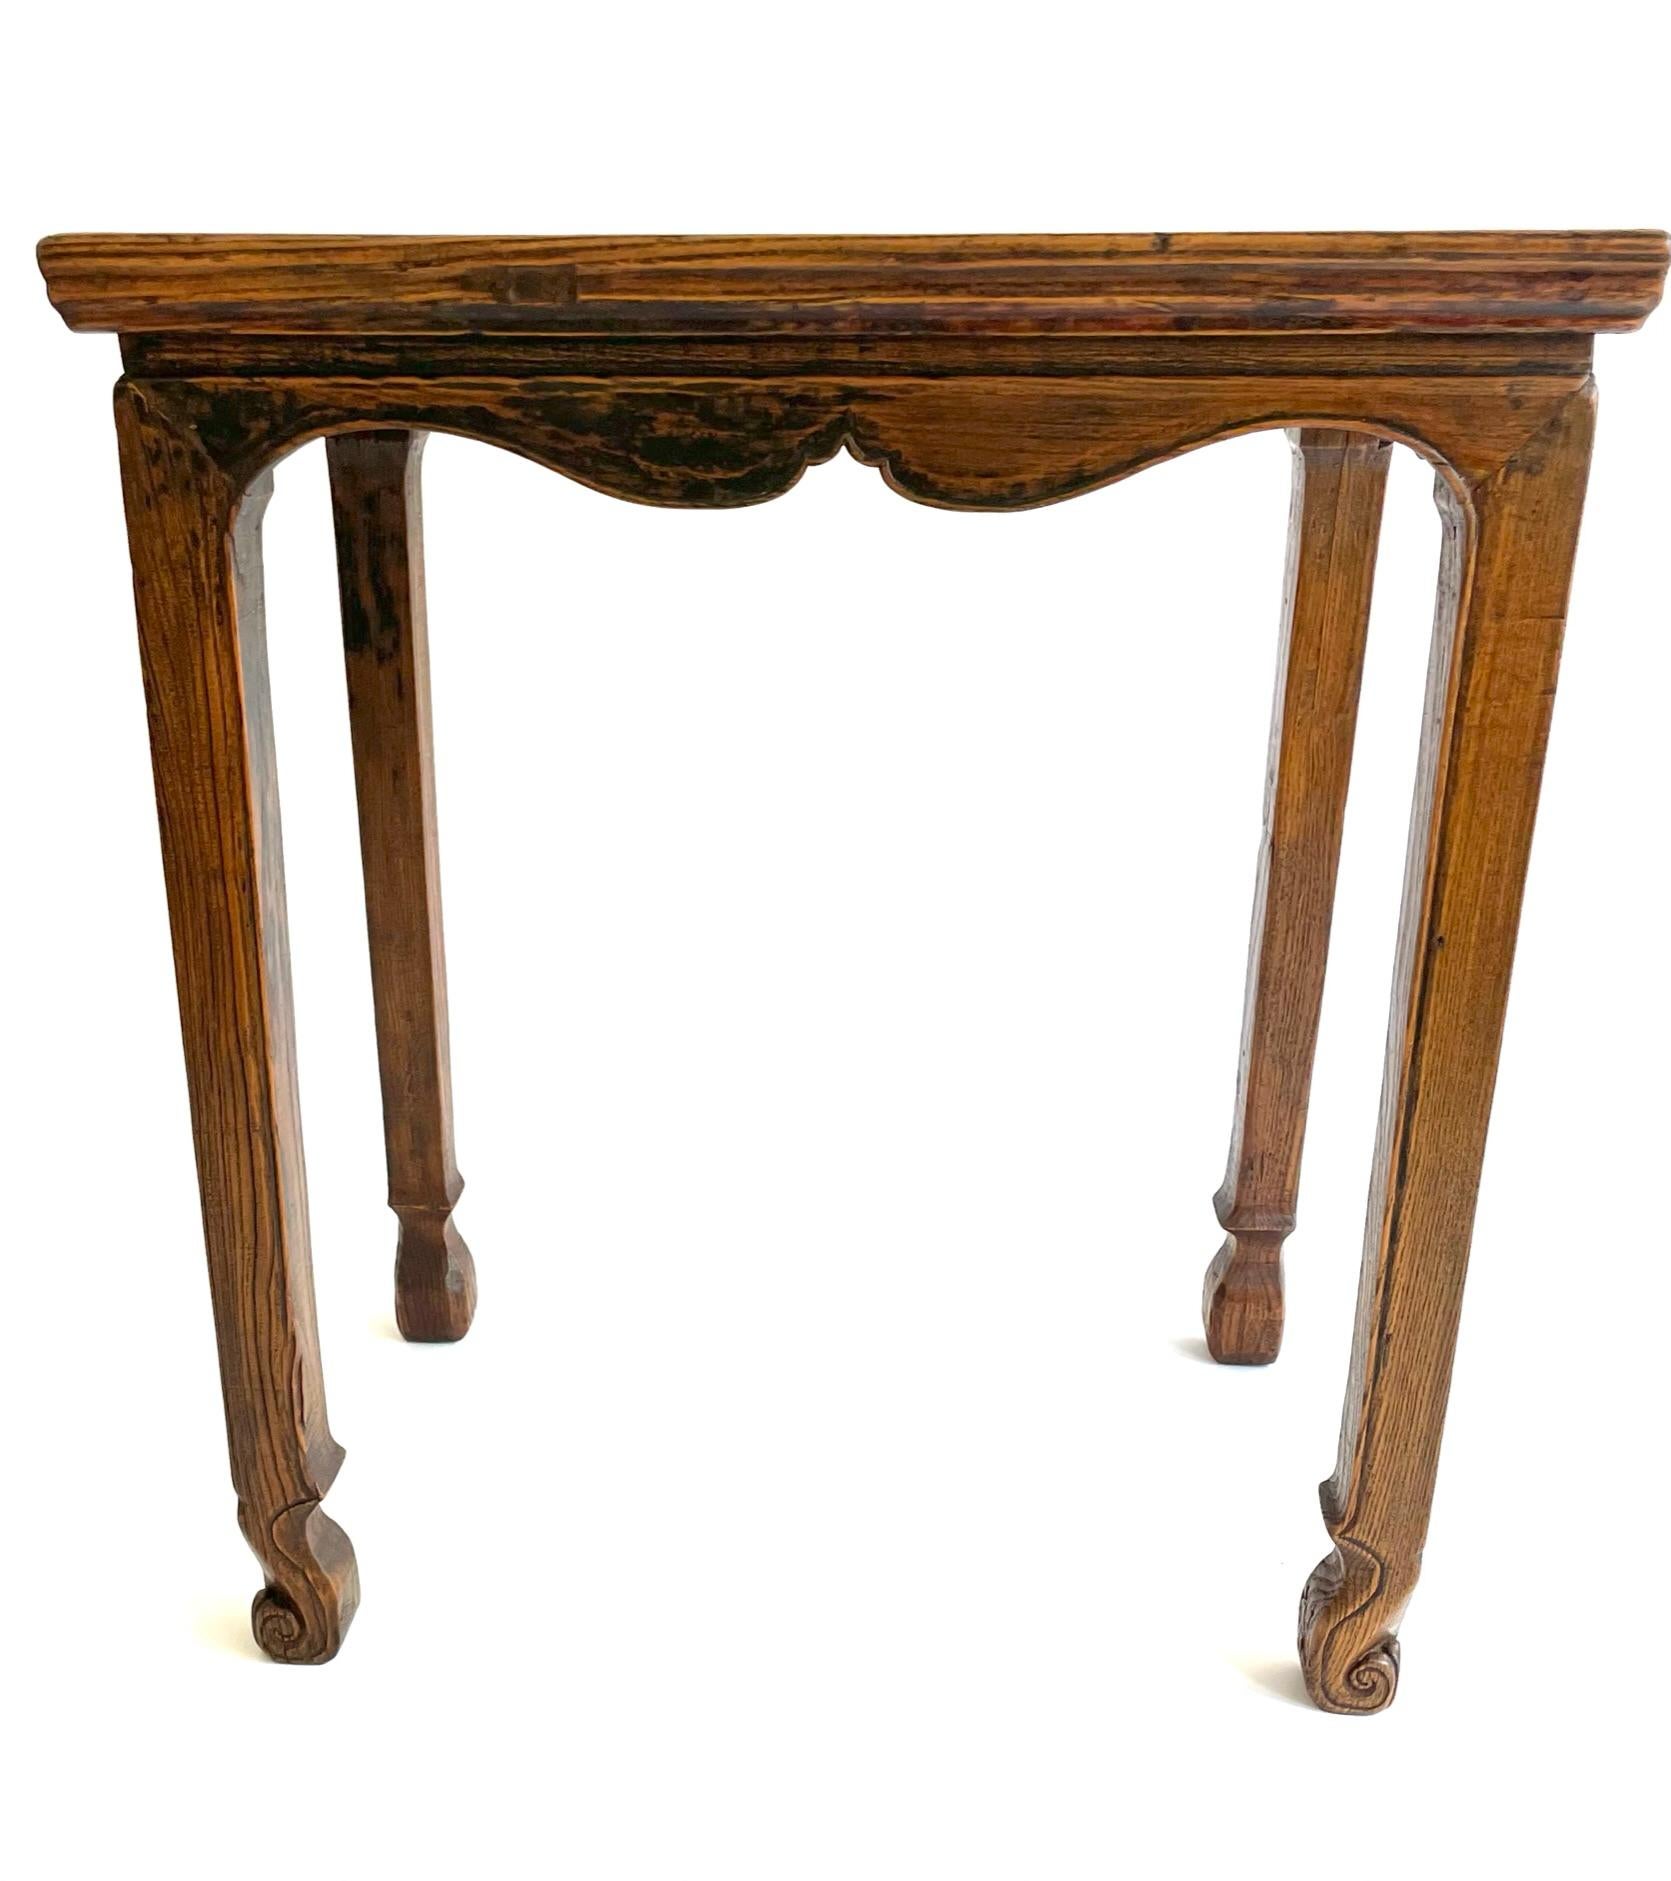 This unusual 19th century petite wine table is carved from Yumu (Chinese Northern Elm) and is from the Shanxi province of northern China. The table is made with traditional mortise and tenon construction. The legs are gracefully carved with a